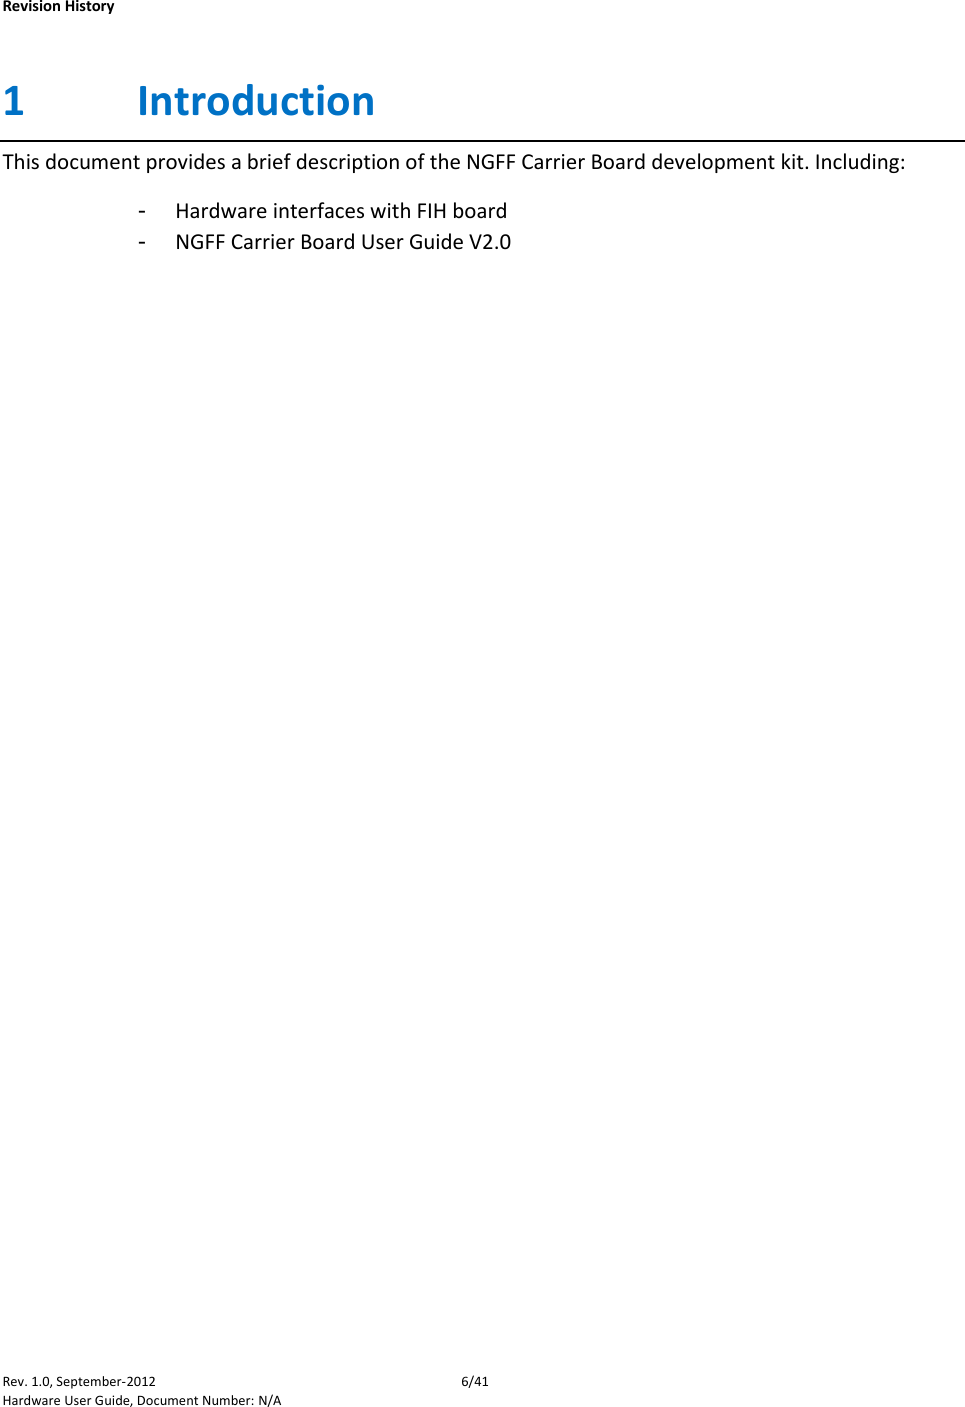    Revision History Rev. 1.0, September-2012  6/41 Hardware User Guide, Document Number: N/A 1 Introduction This document provides a brief description of the NGFF Carrier Board development kit. Including: - Hardware interfaces with FIH board - NGFF Carrier Board User Guide V2.0                        